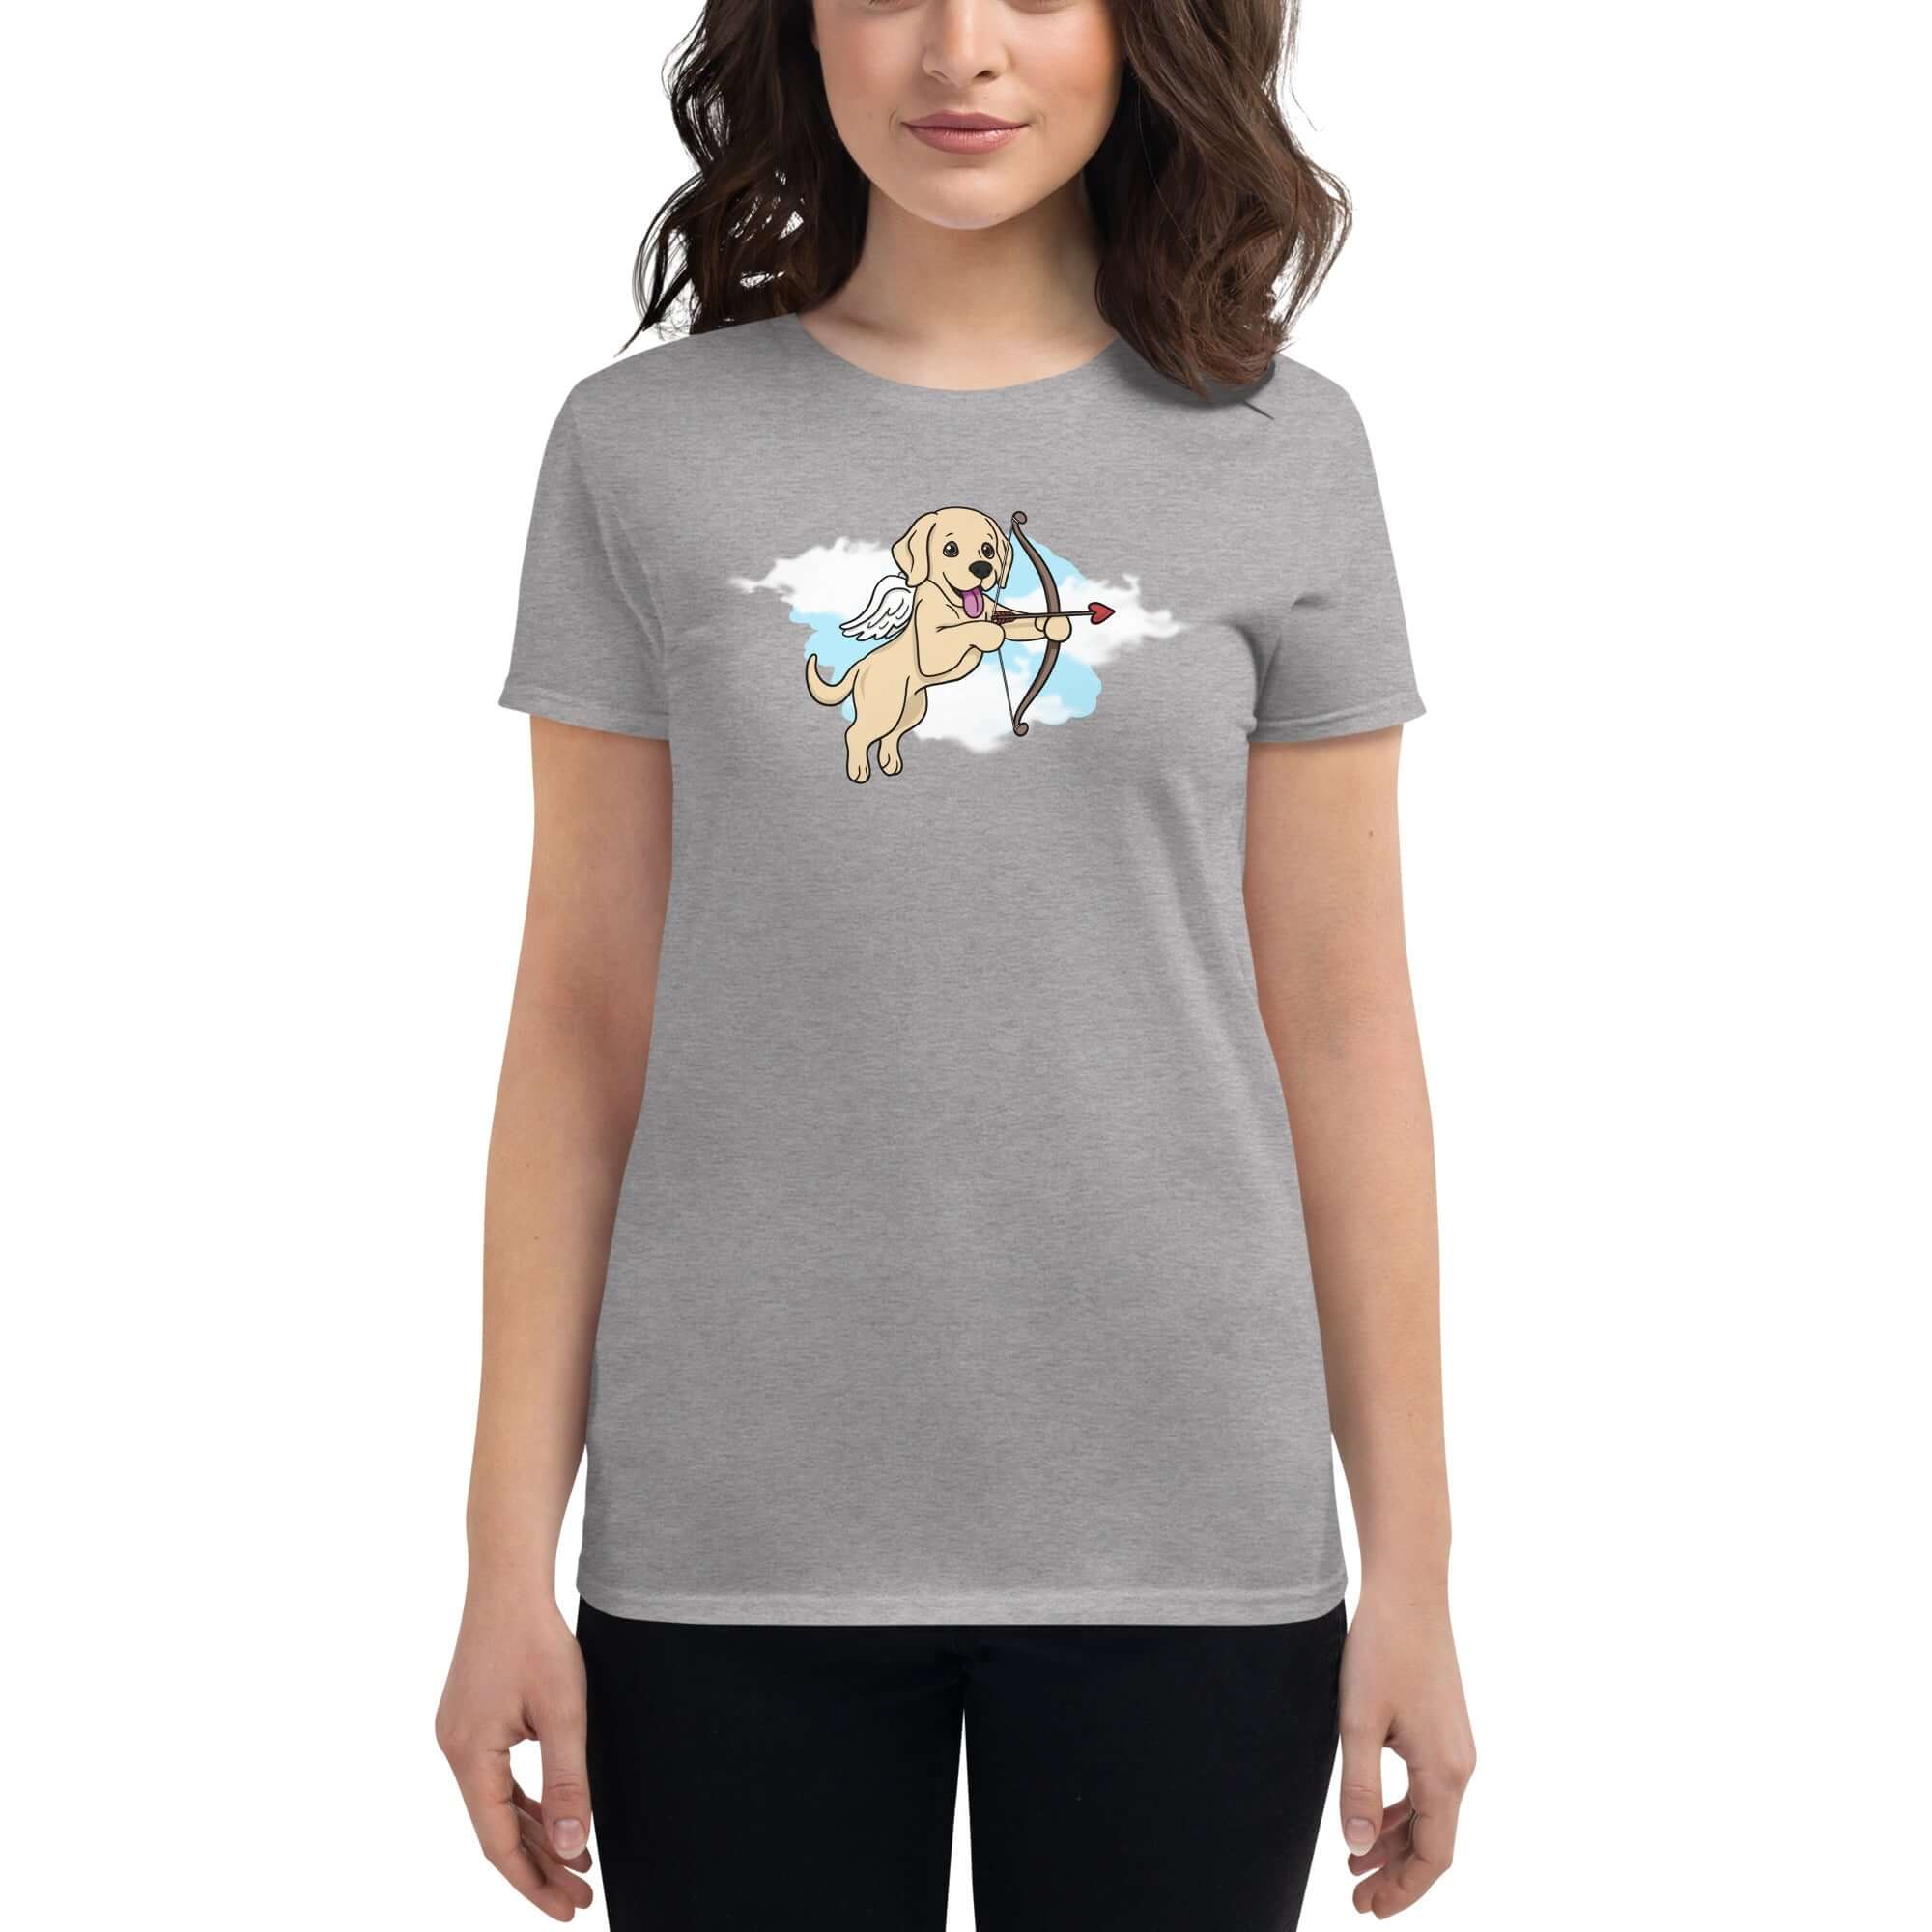 Cupup Women's Fit T-Shirt - TAILWAGS UNLIMITED